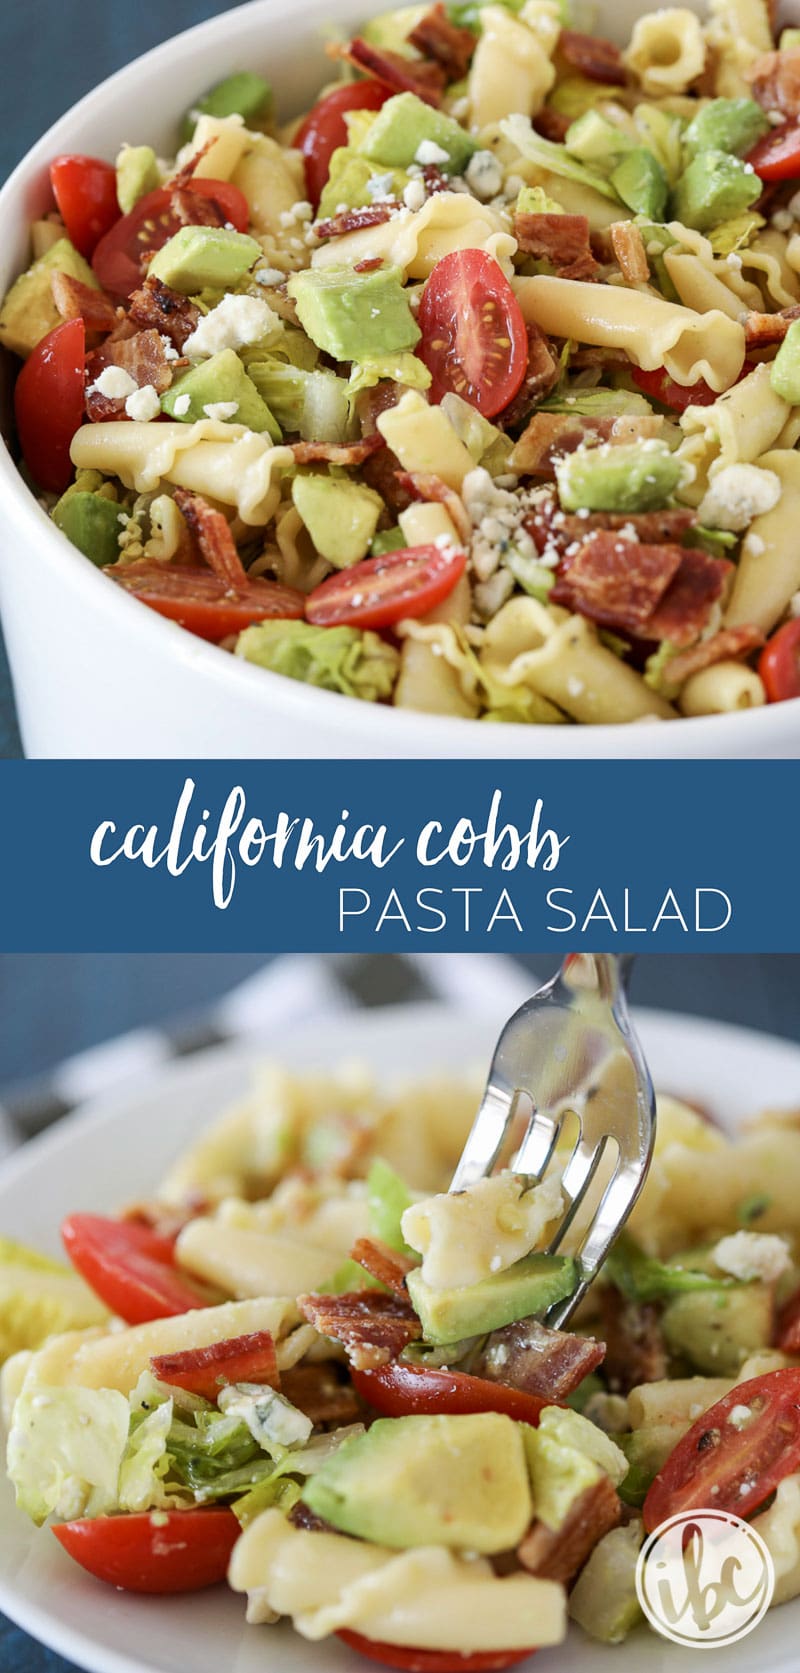 This California Cobb Pasta Salad Recipe with bacon, avocado, blue cheese, romaine, and tomatoes is perfect for summer entertaining! #pasta #salad #recipe #appetizer